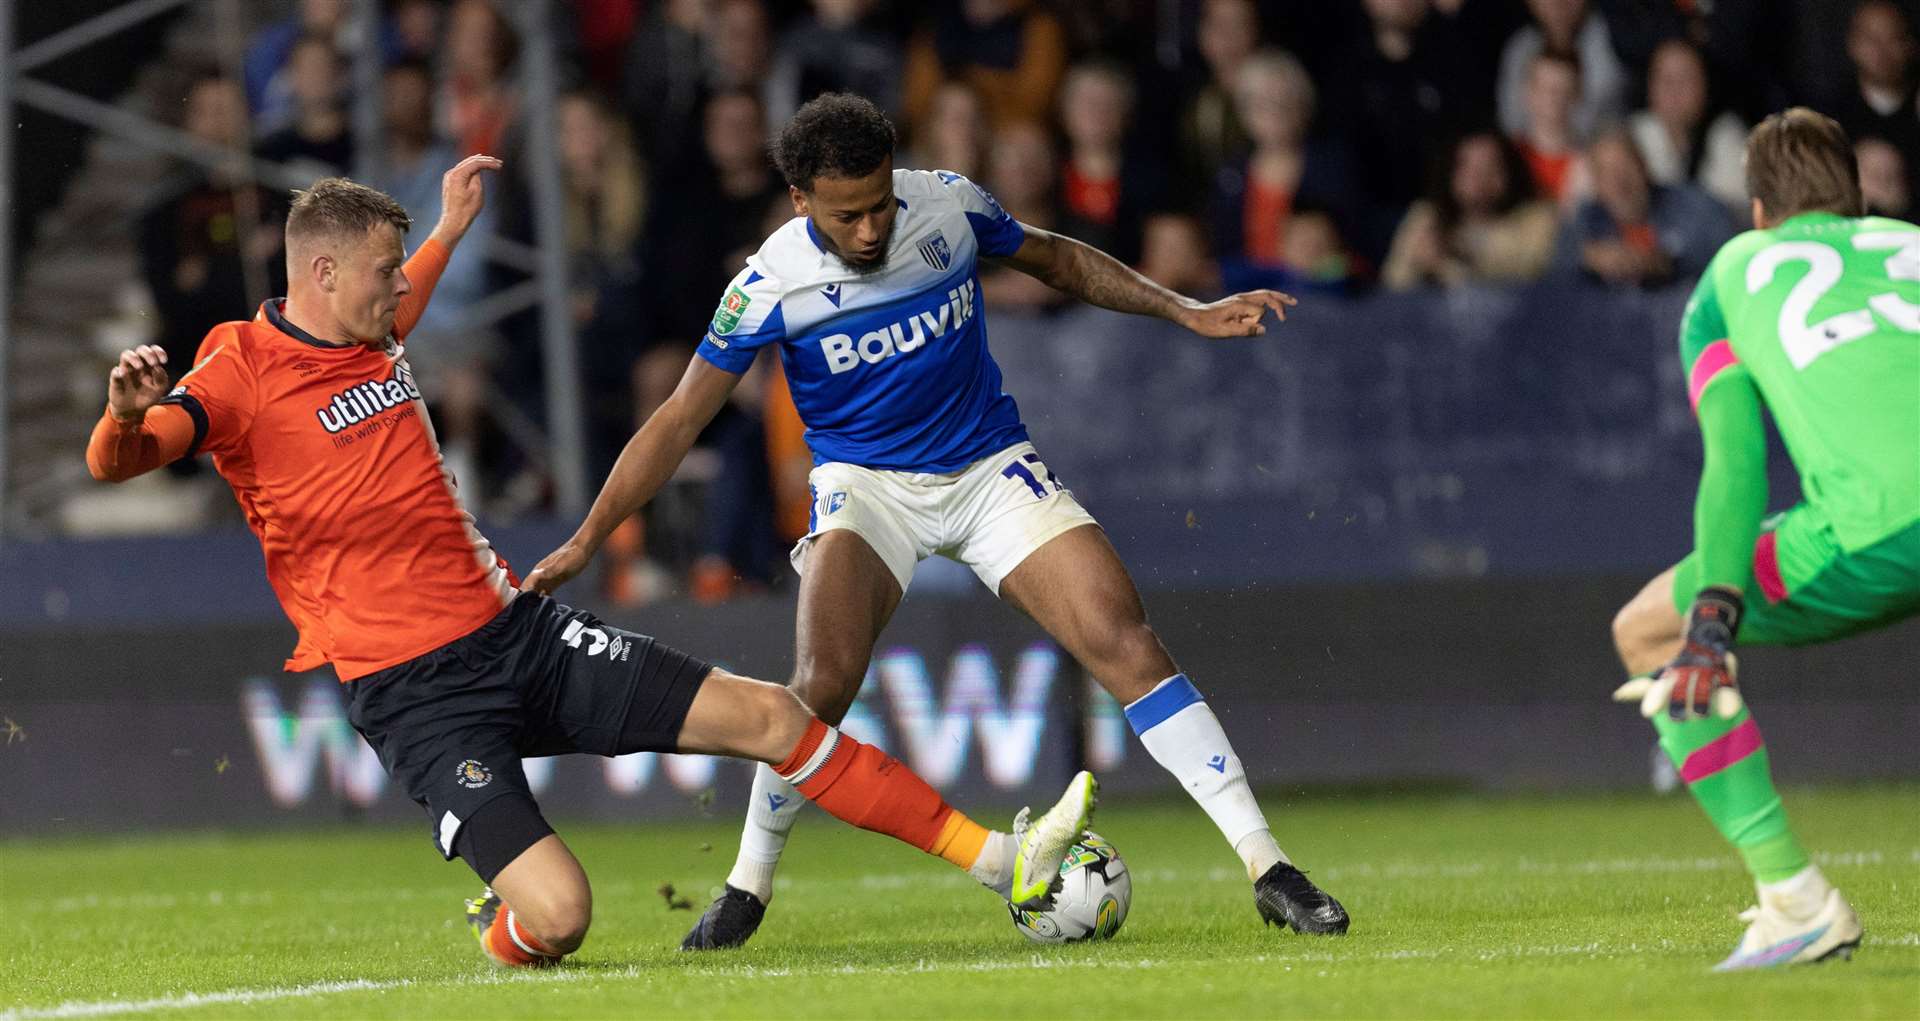 Jayden Clarke turned on the style at Kenilworth Road on Tuesday. Picture: @Julian_KPI